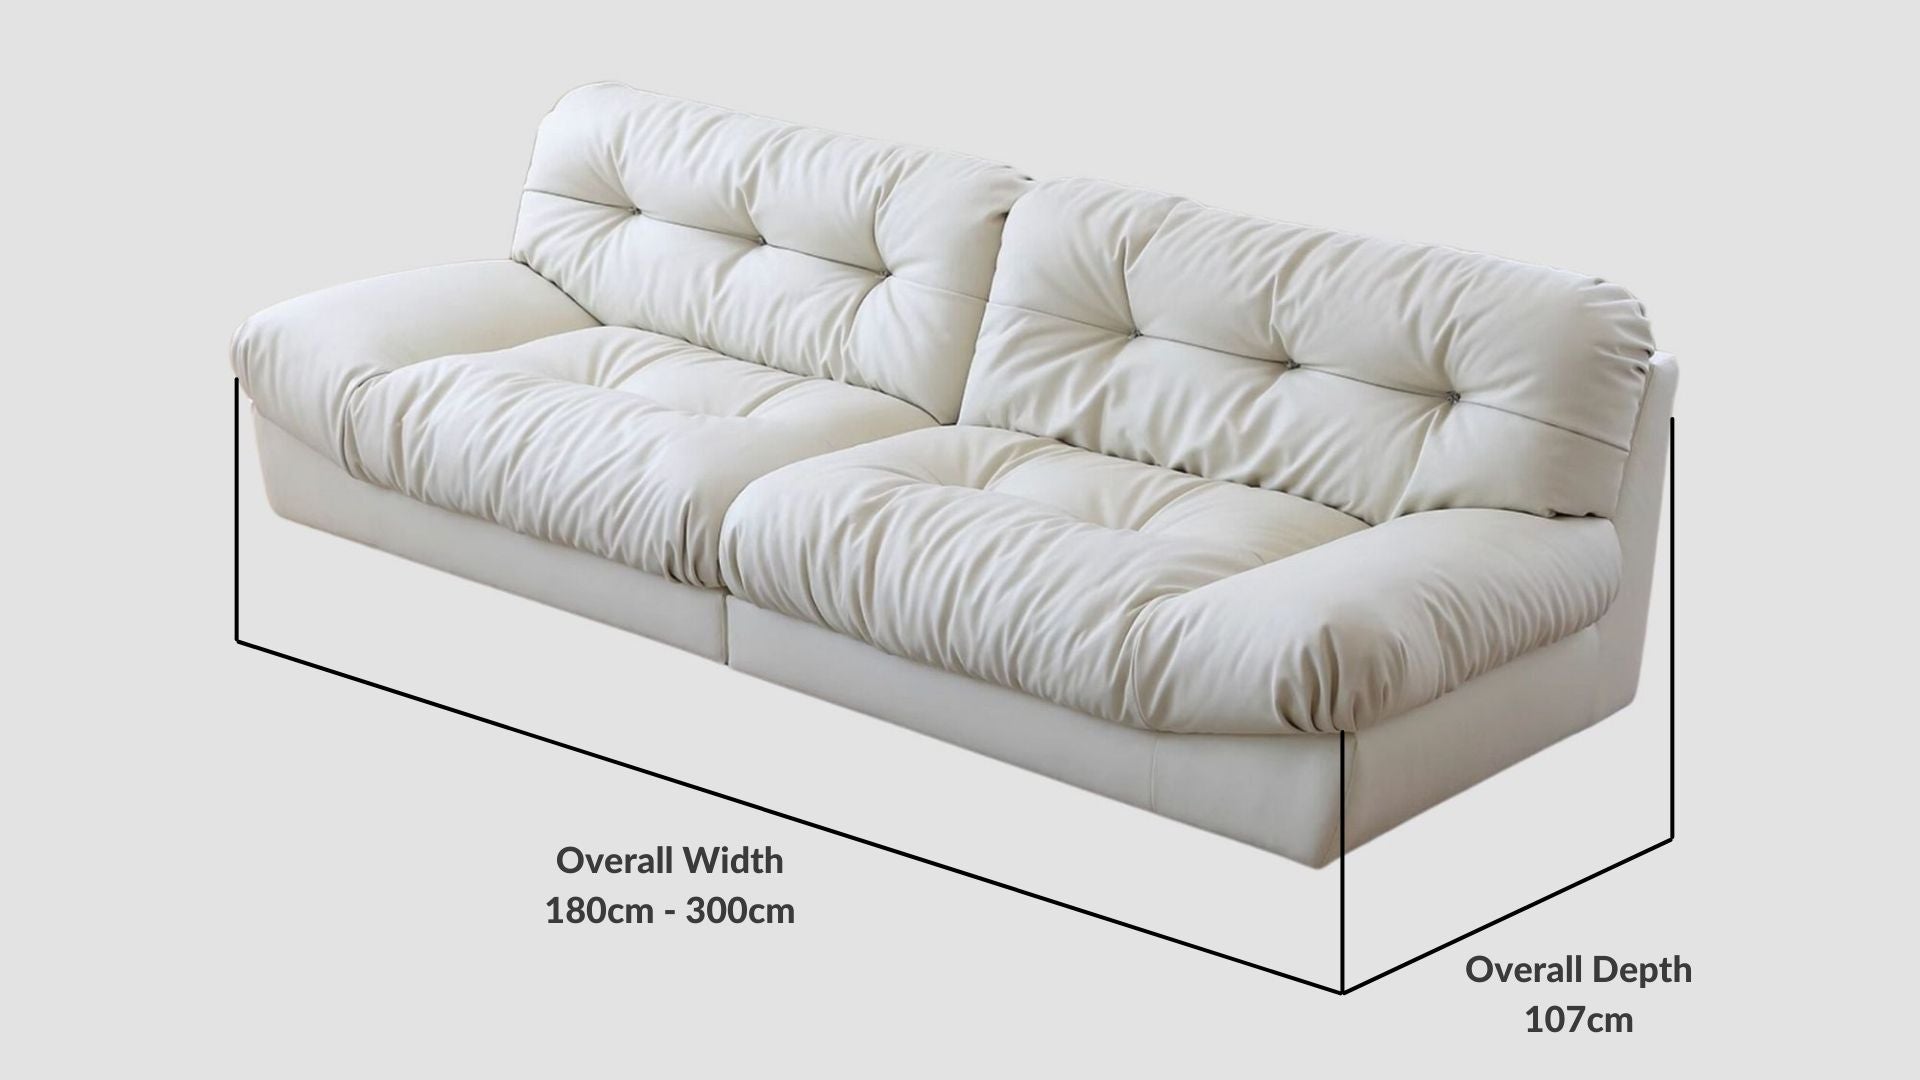 Details the key dimensions in terms of overall width, overall depth and seat width for Clora Full Leather Sofa